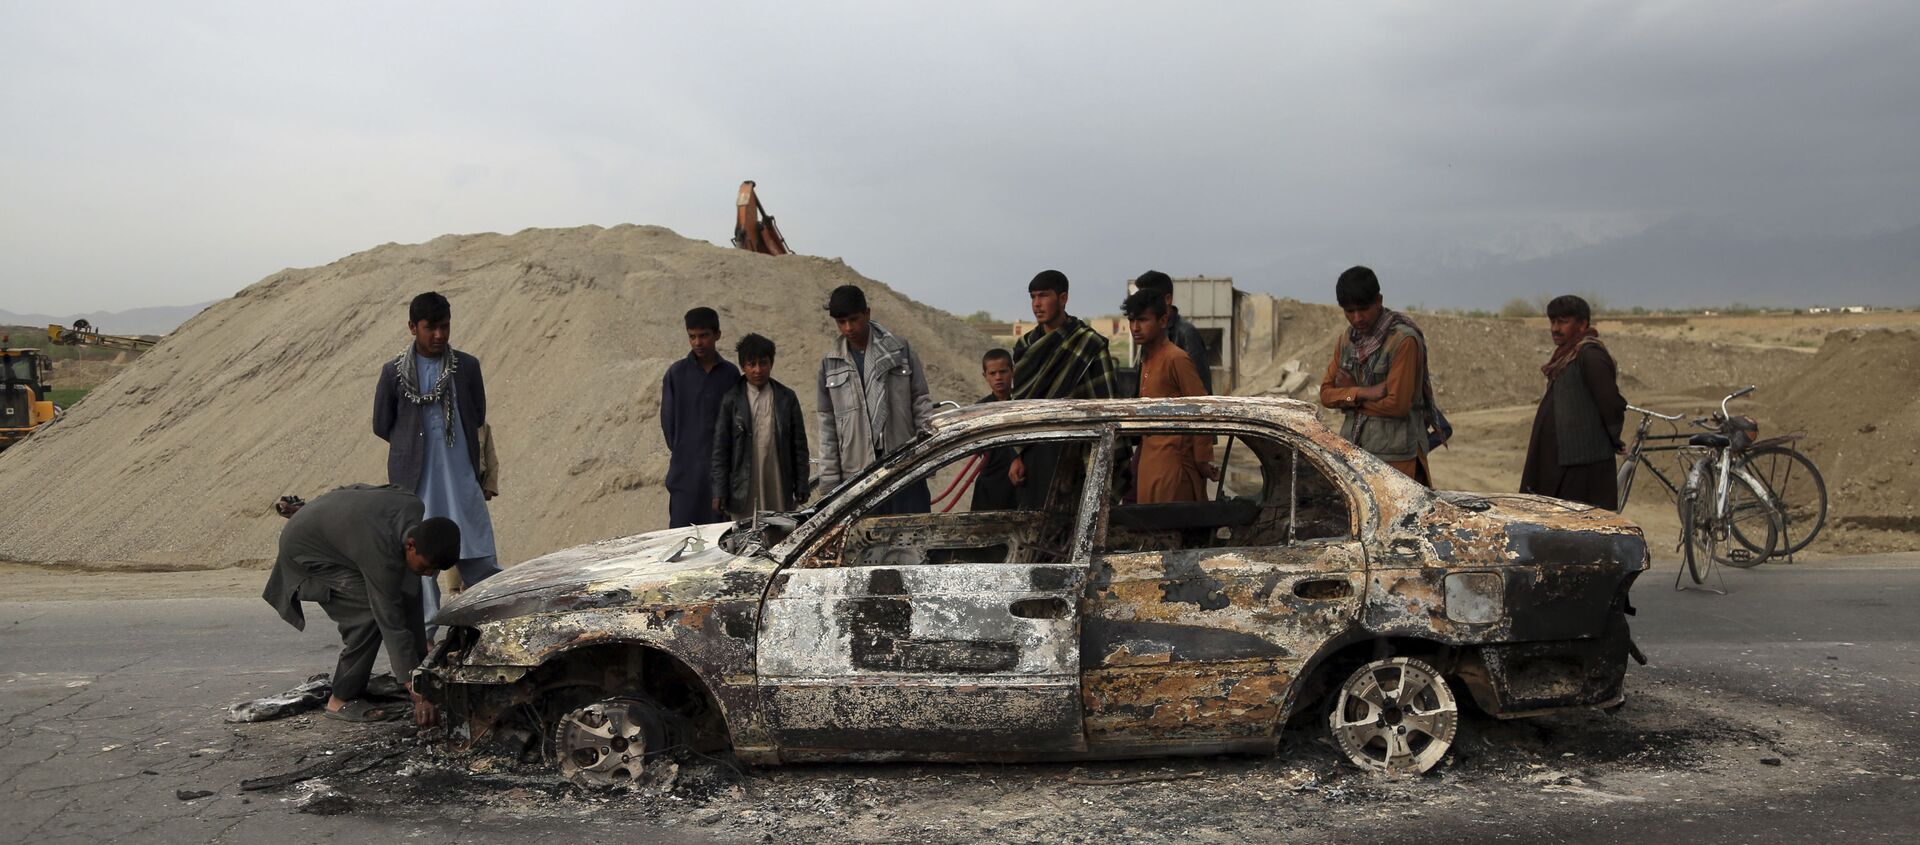 In this April 9, 2019, file photo, Afghans watch a civilian vehicle burnt after being shot by U.S. forces following an attack near the Bagram Air Base, north of Kabul, Afghanistan. Three American service members and a U.S. contractor were killed when their convoy hit a roadside bomb on Monday near the main U.S. base in Afghanistan, the U.S. forces said. The Taliban claimed responsibility for the attack. Intelligence alleging that Afghan militants might have accepted Russian bounties for killing American troops didn’t scuttle the U.S.-Taliban agreement or President Donald Trump’s plan to withdraw thousands more troops from the war - Sputnik International, 1920, 16.04.2021